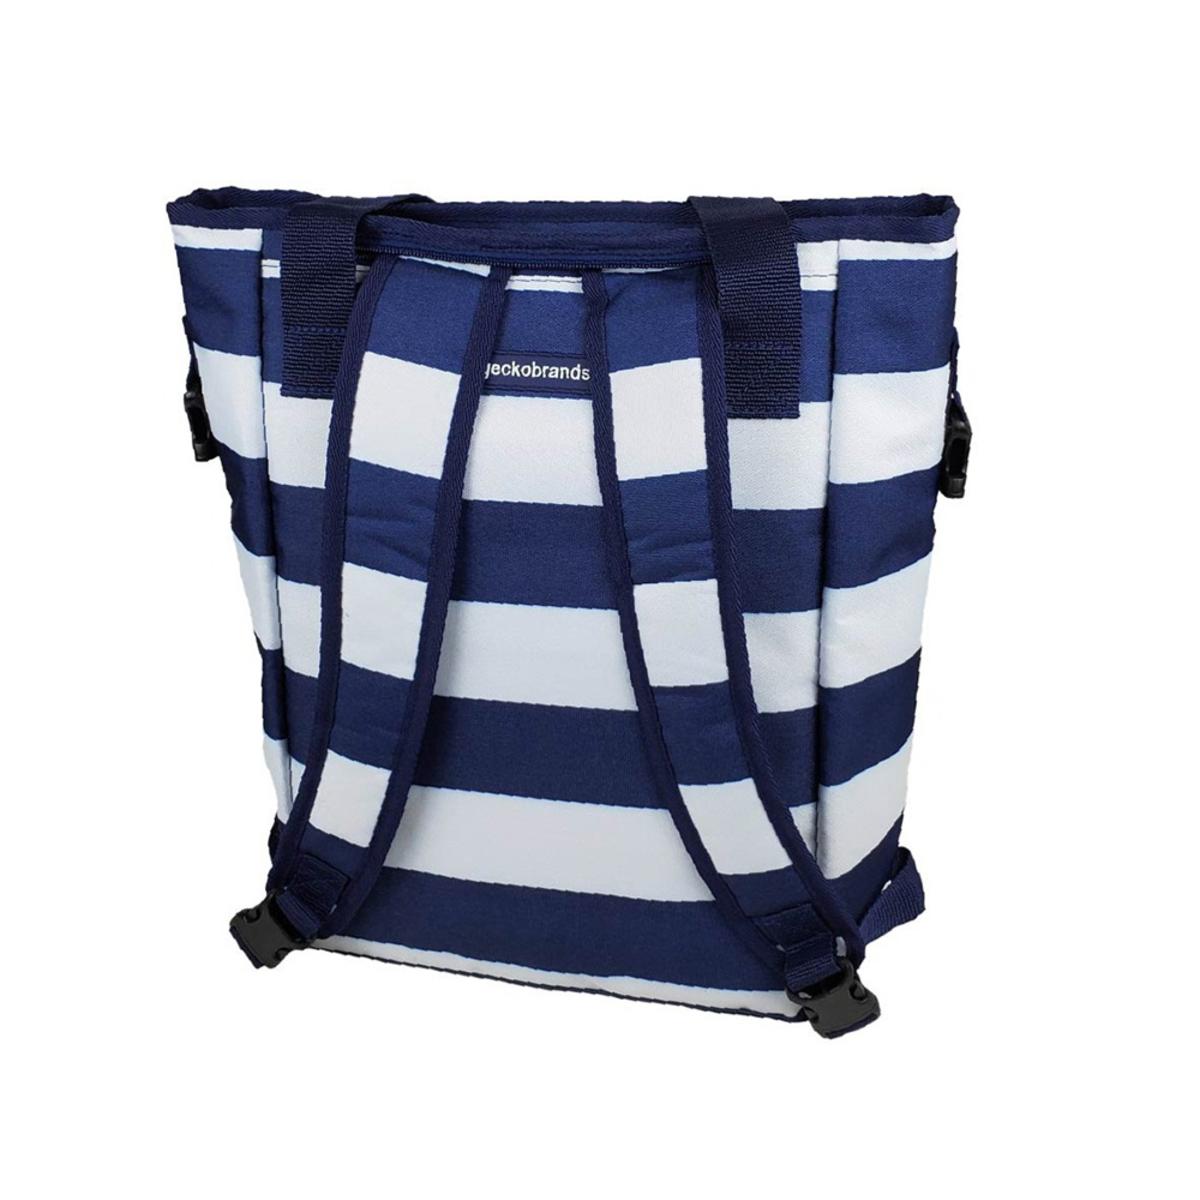 Geckobrands Convertible Tote & Backpack - Blue/White Stripe